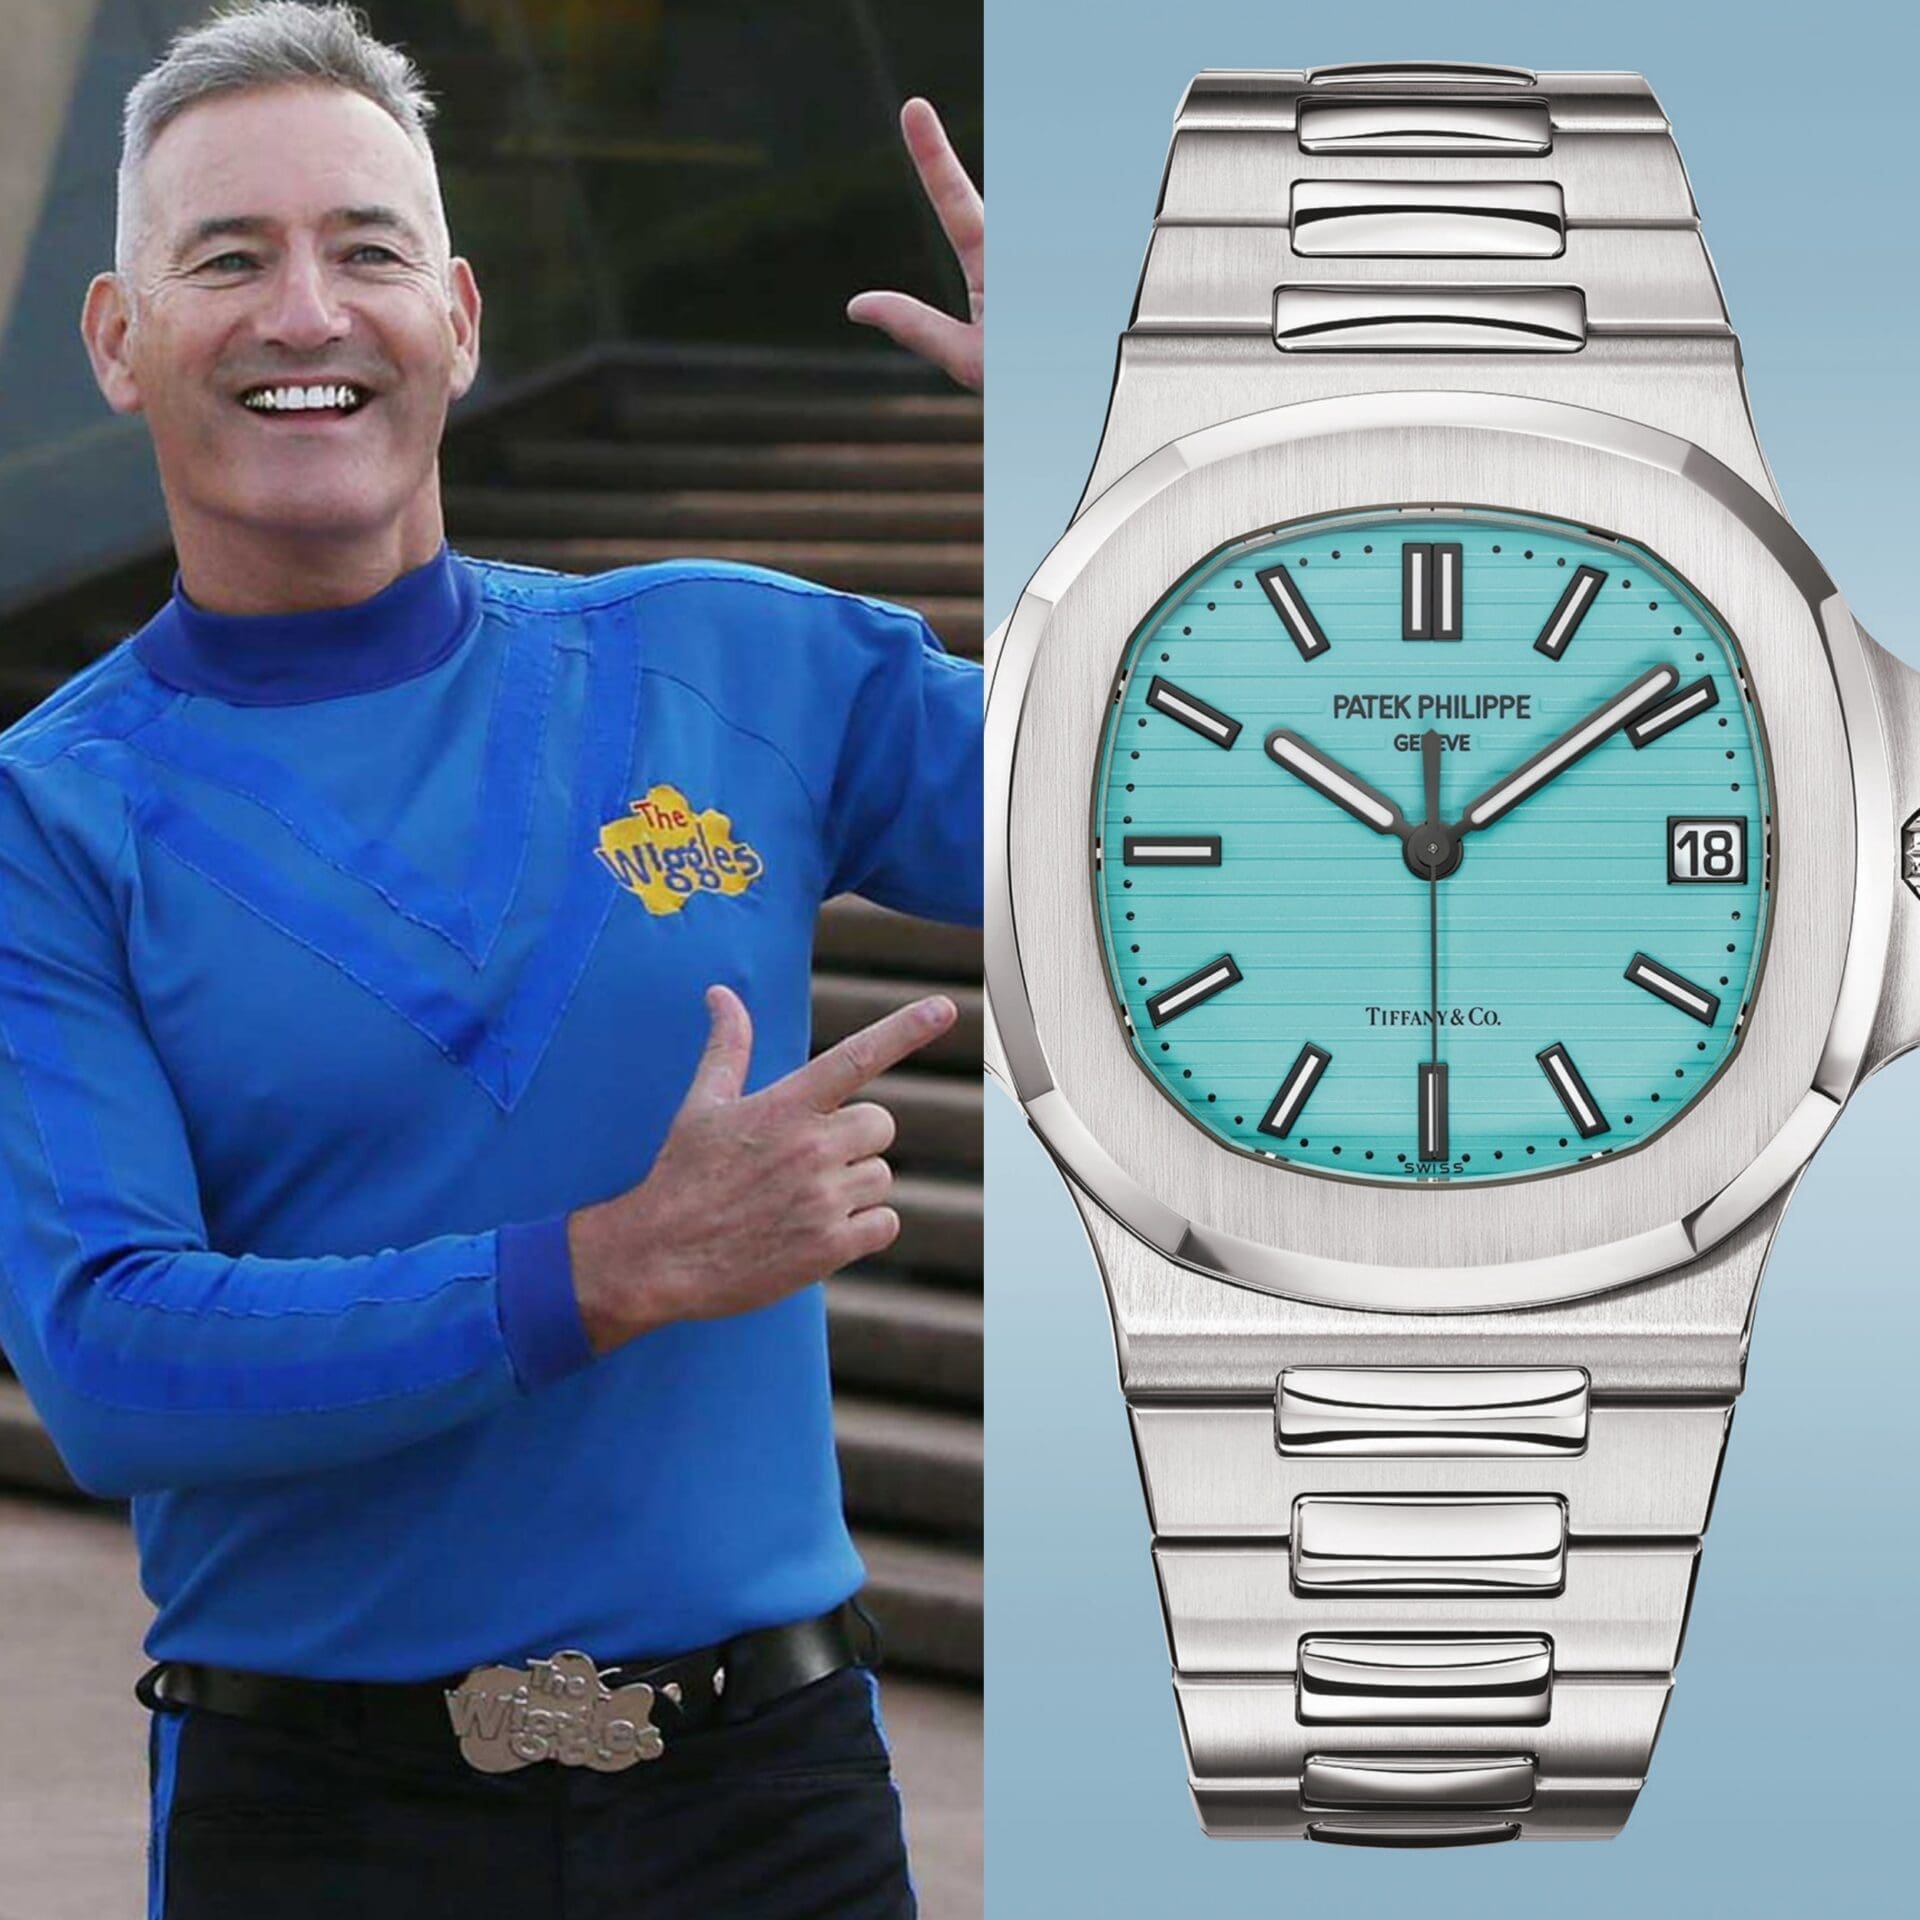 Anthony the Blue Wiggle insists his watches are fake